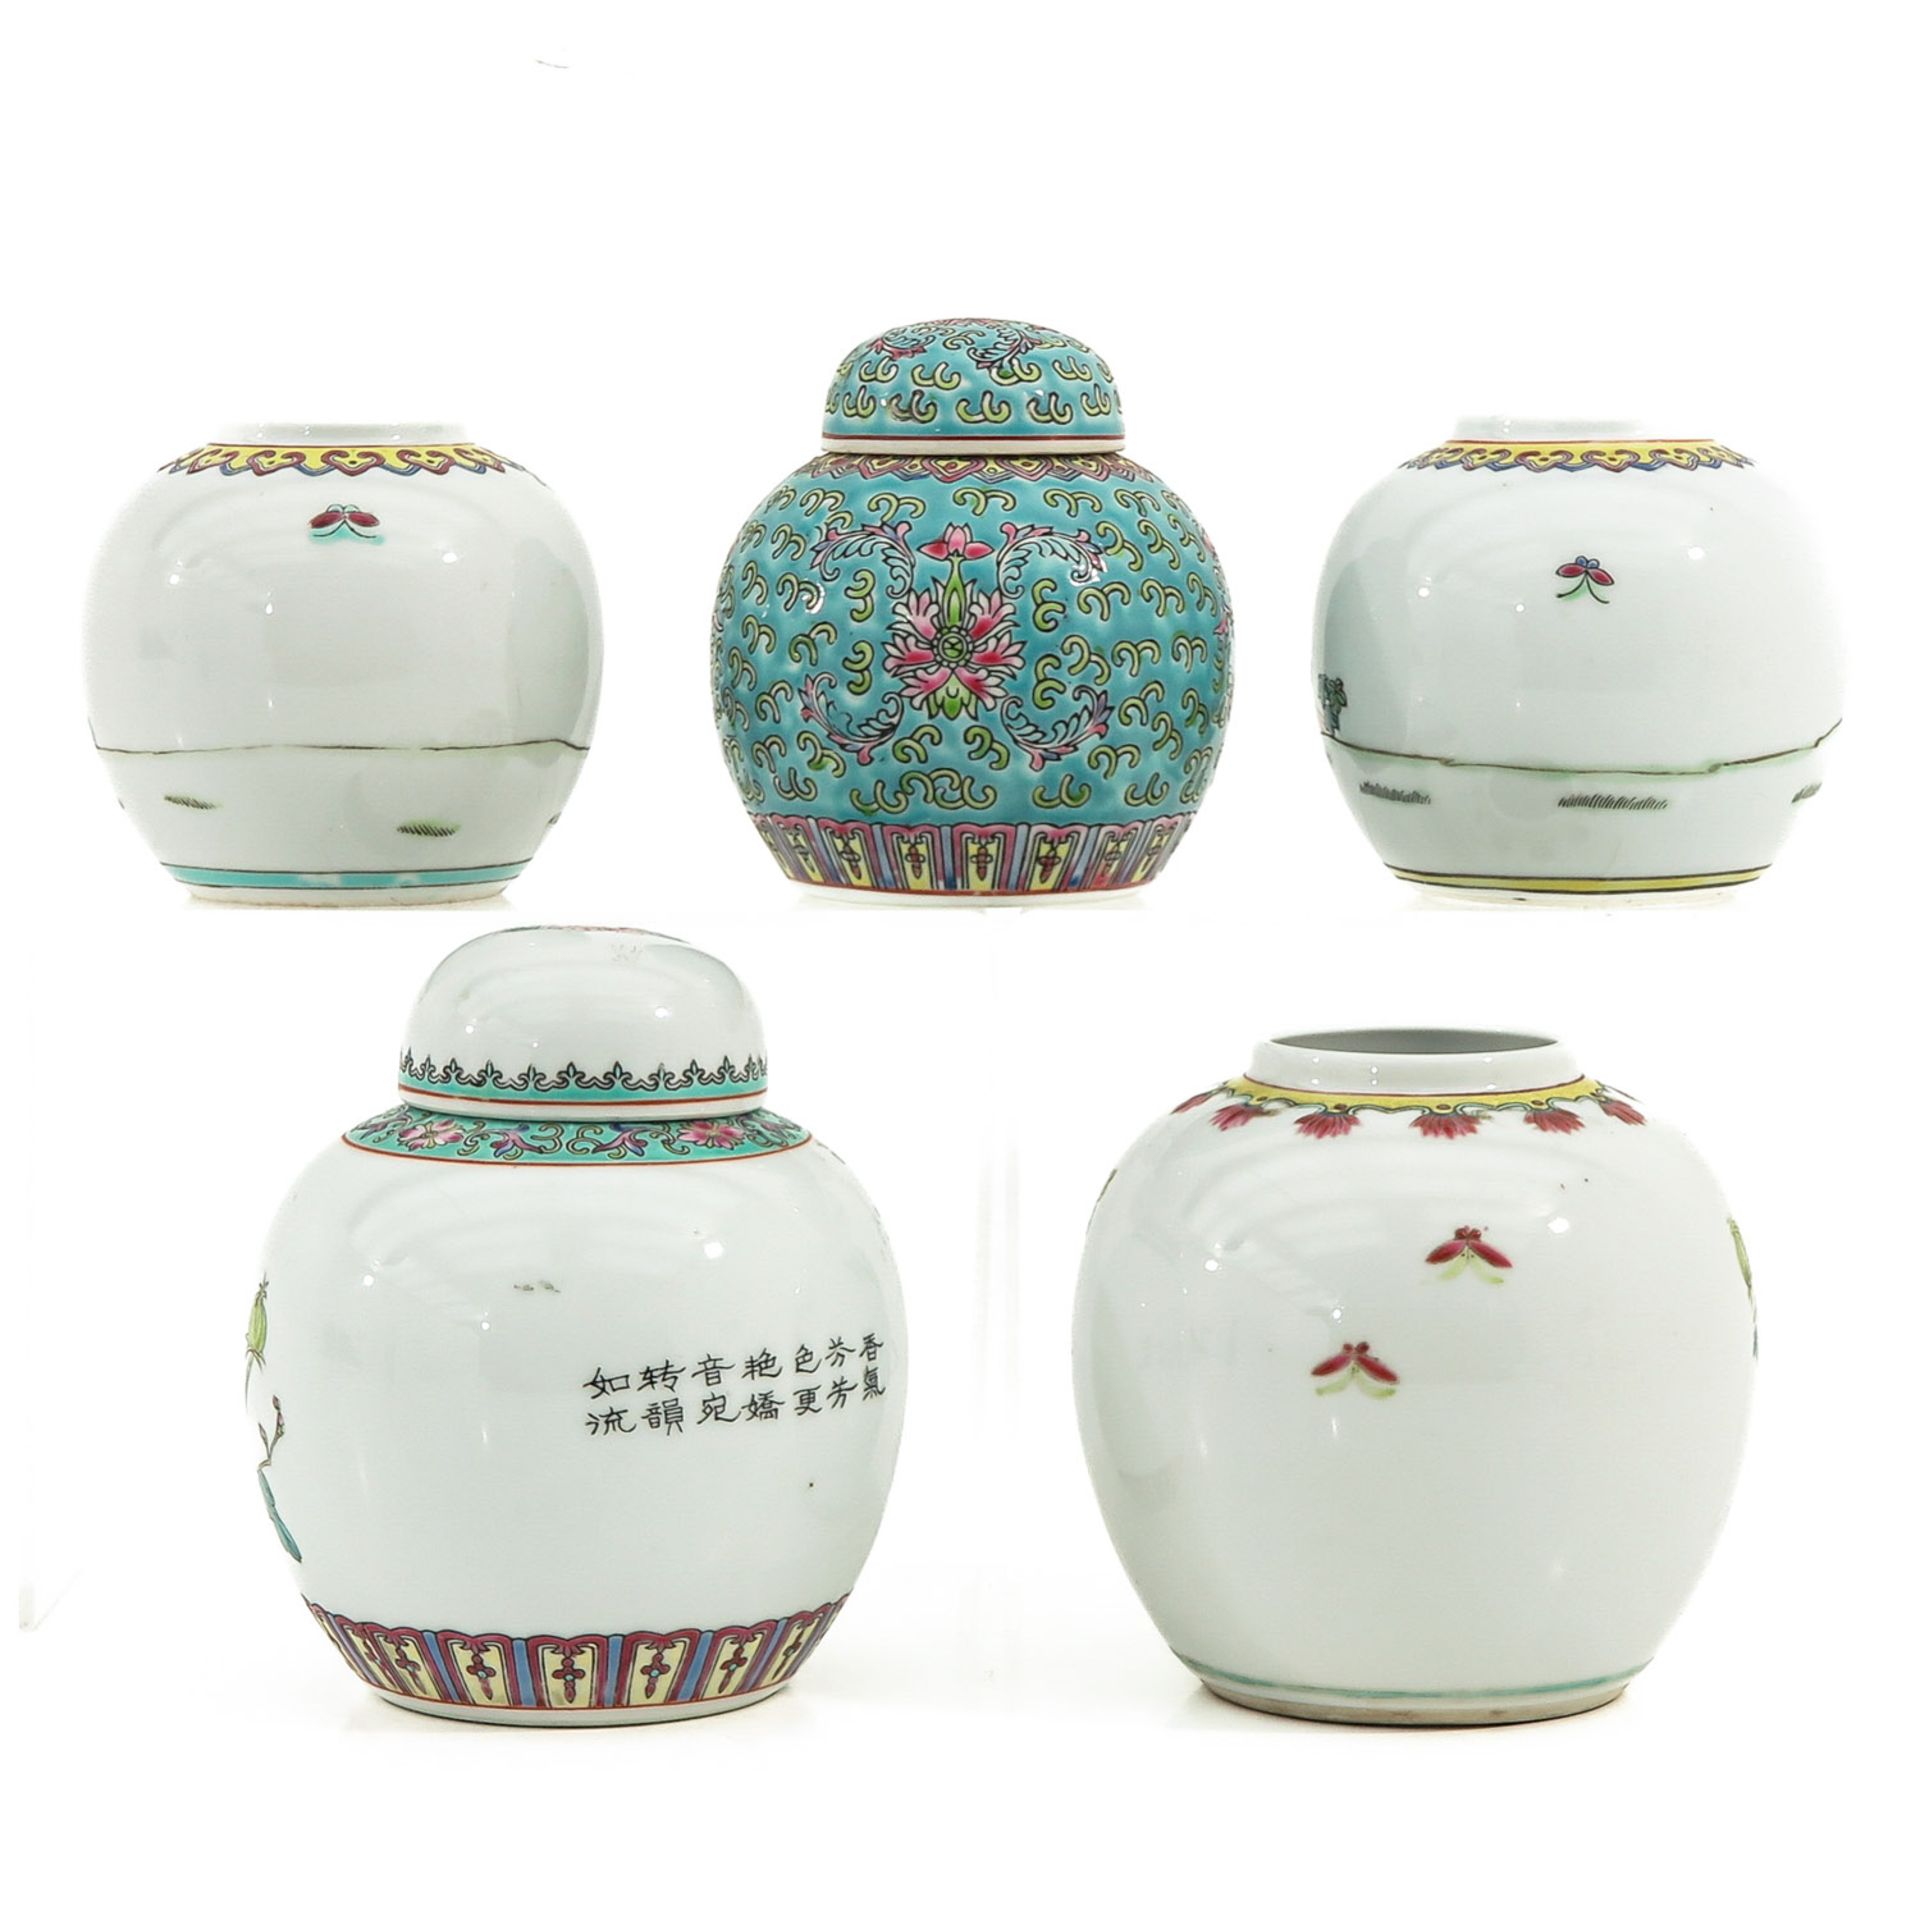 A Collection of 5 Ginger Jars - Image 3 of 10